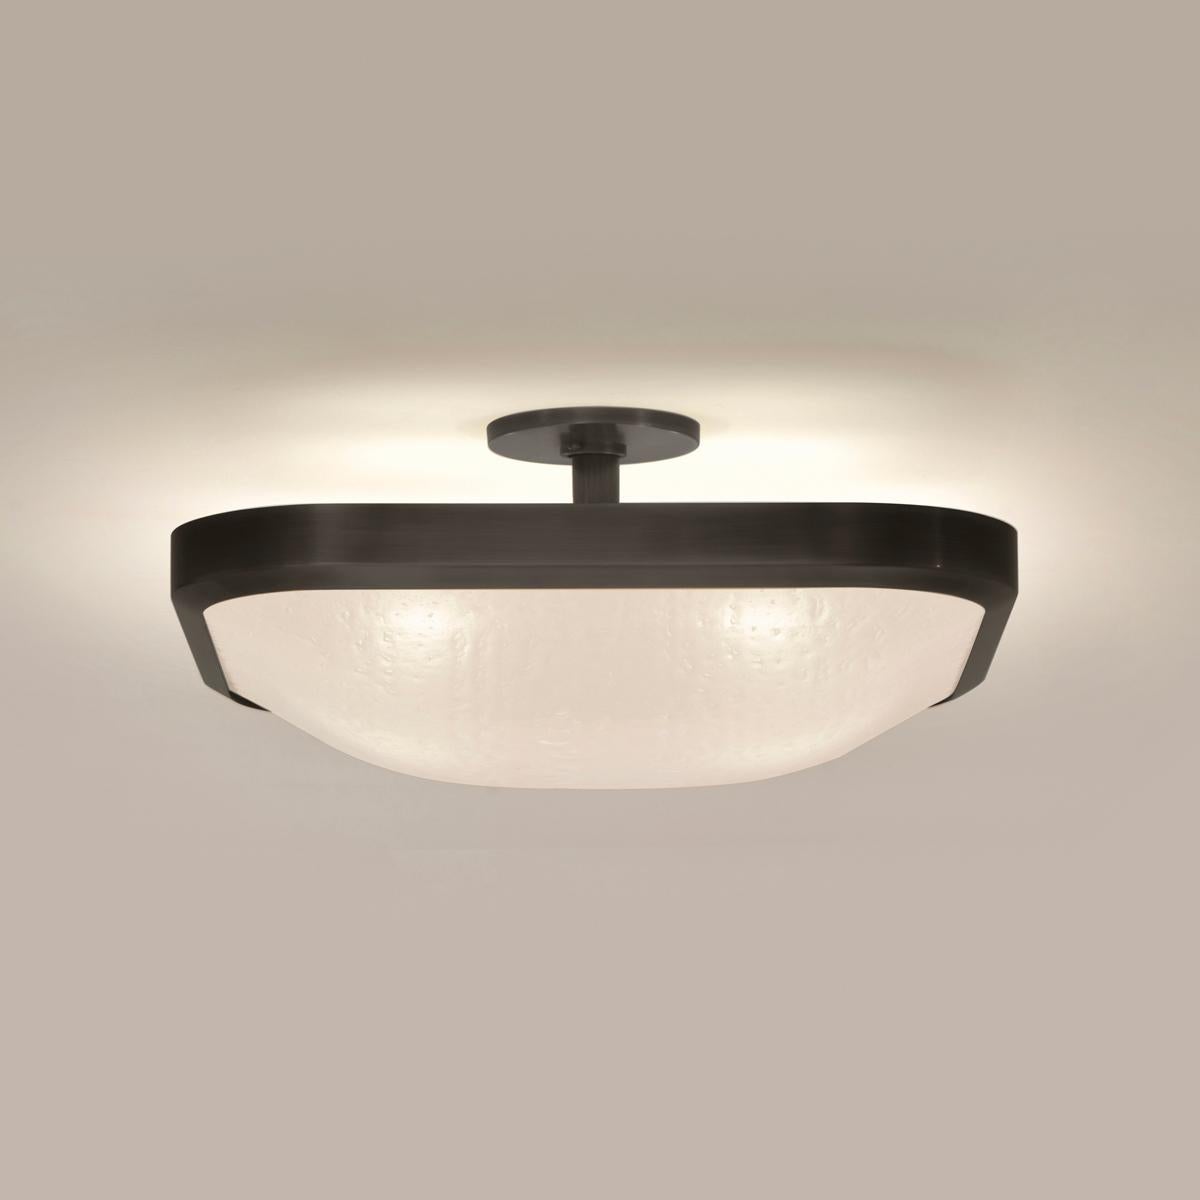 Italian Uno Square Ceiling Light by Gaspare Asaro-Polished Nickel Finish For Sale